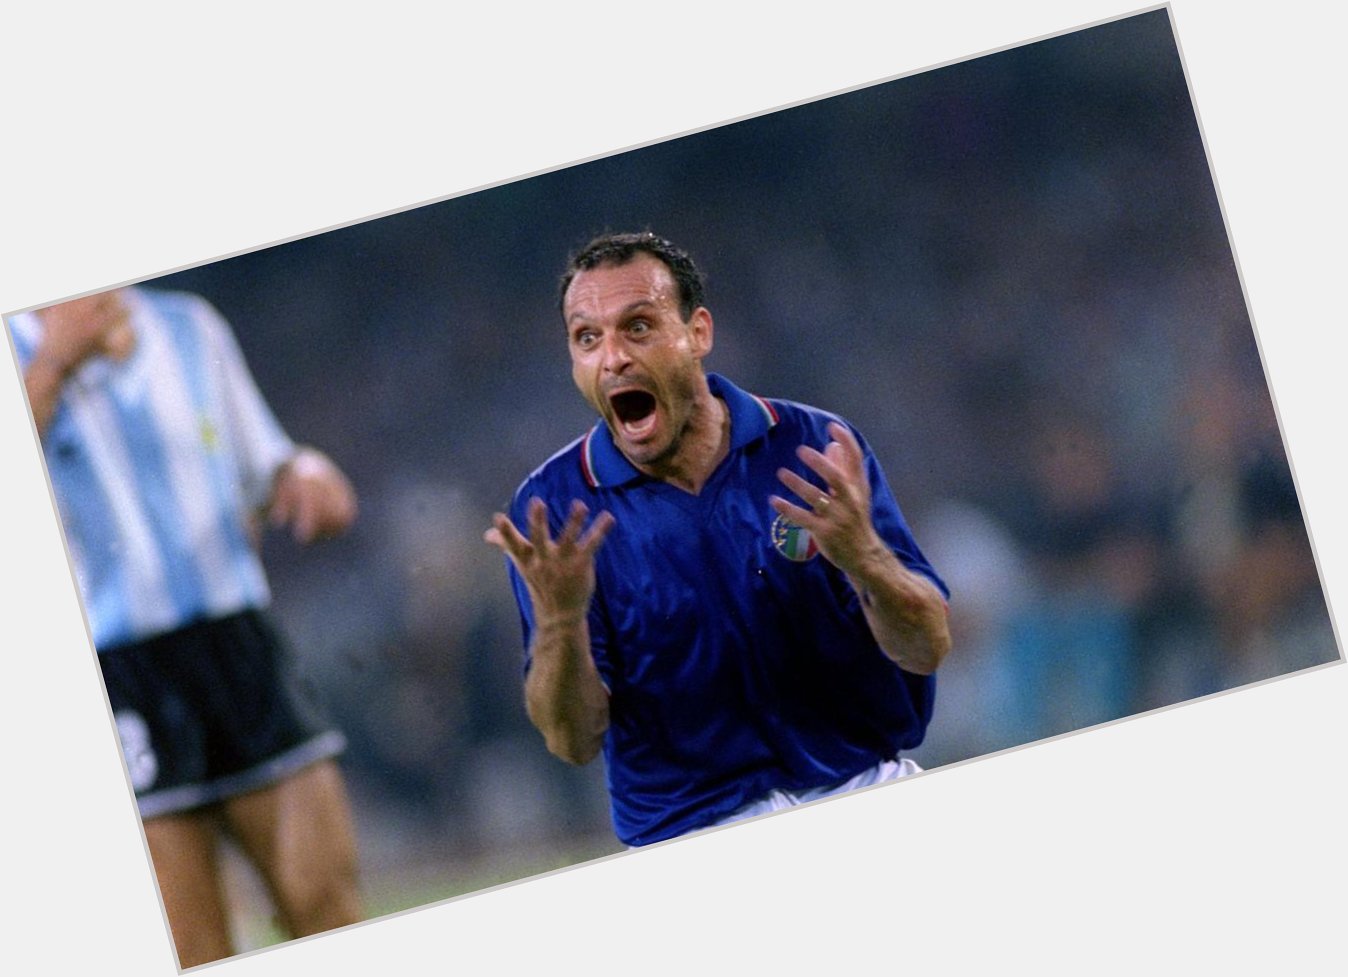 Happy birthday to Salvatore Schillaci, who turns 50 today

Schillaci scored six goals for Italy at the 1990 World Cup 